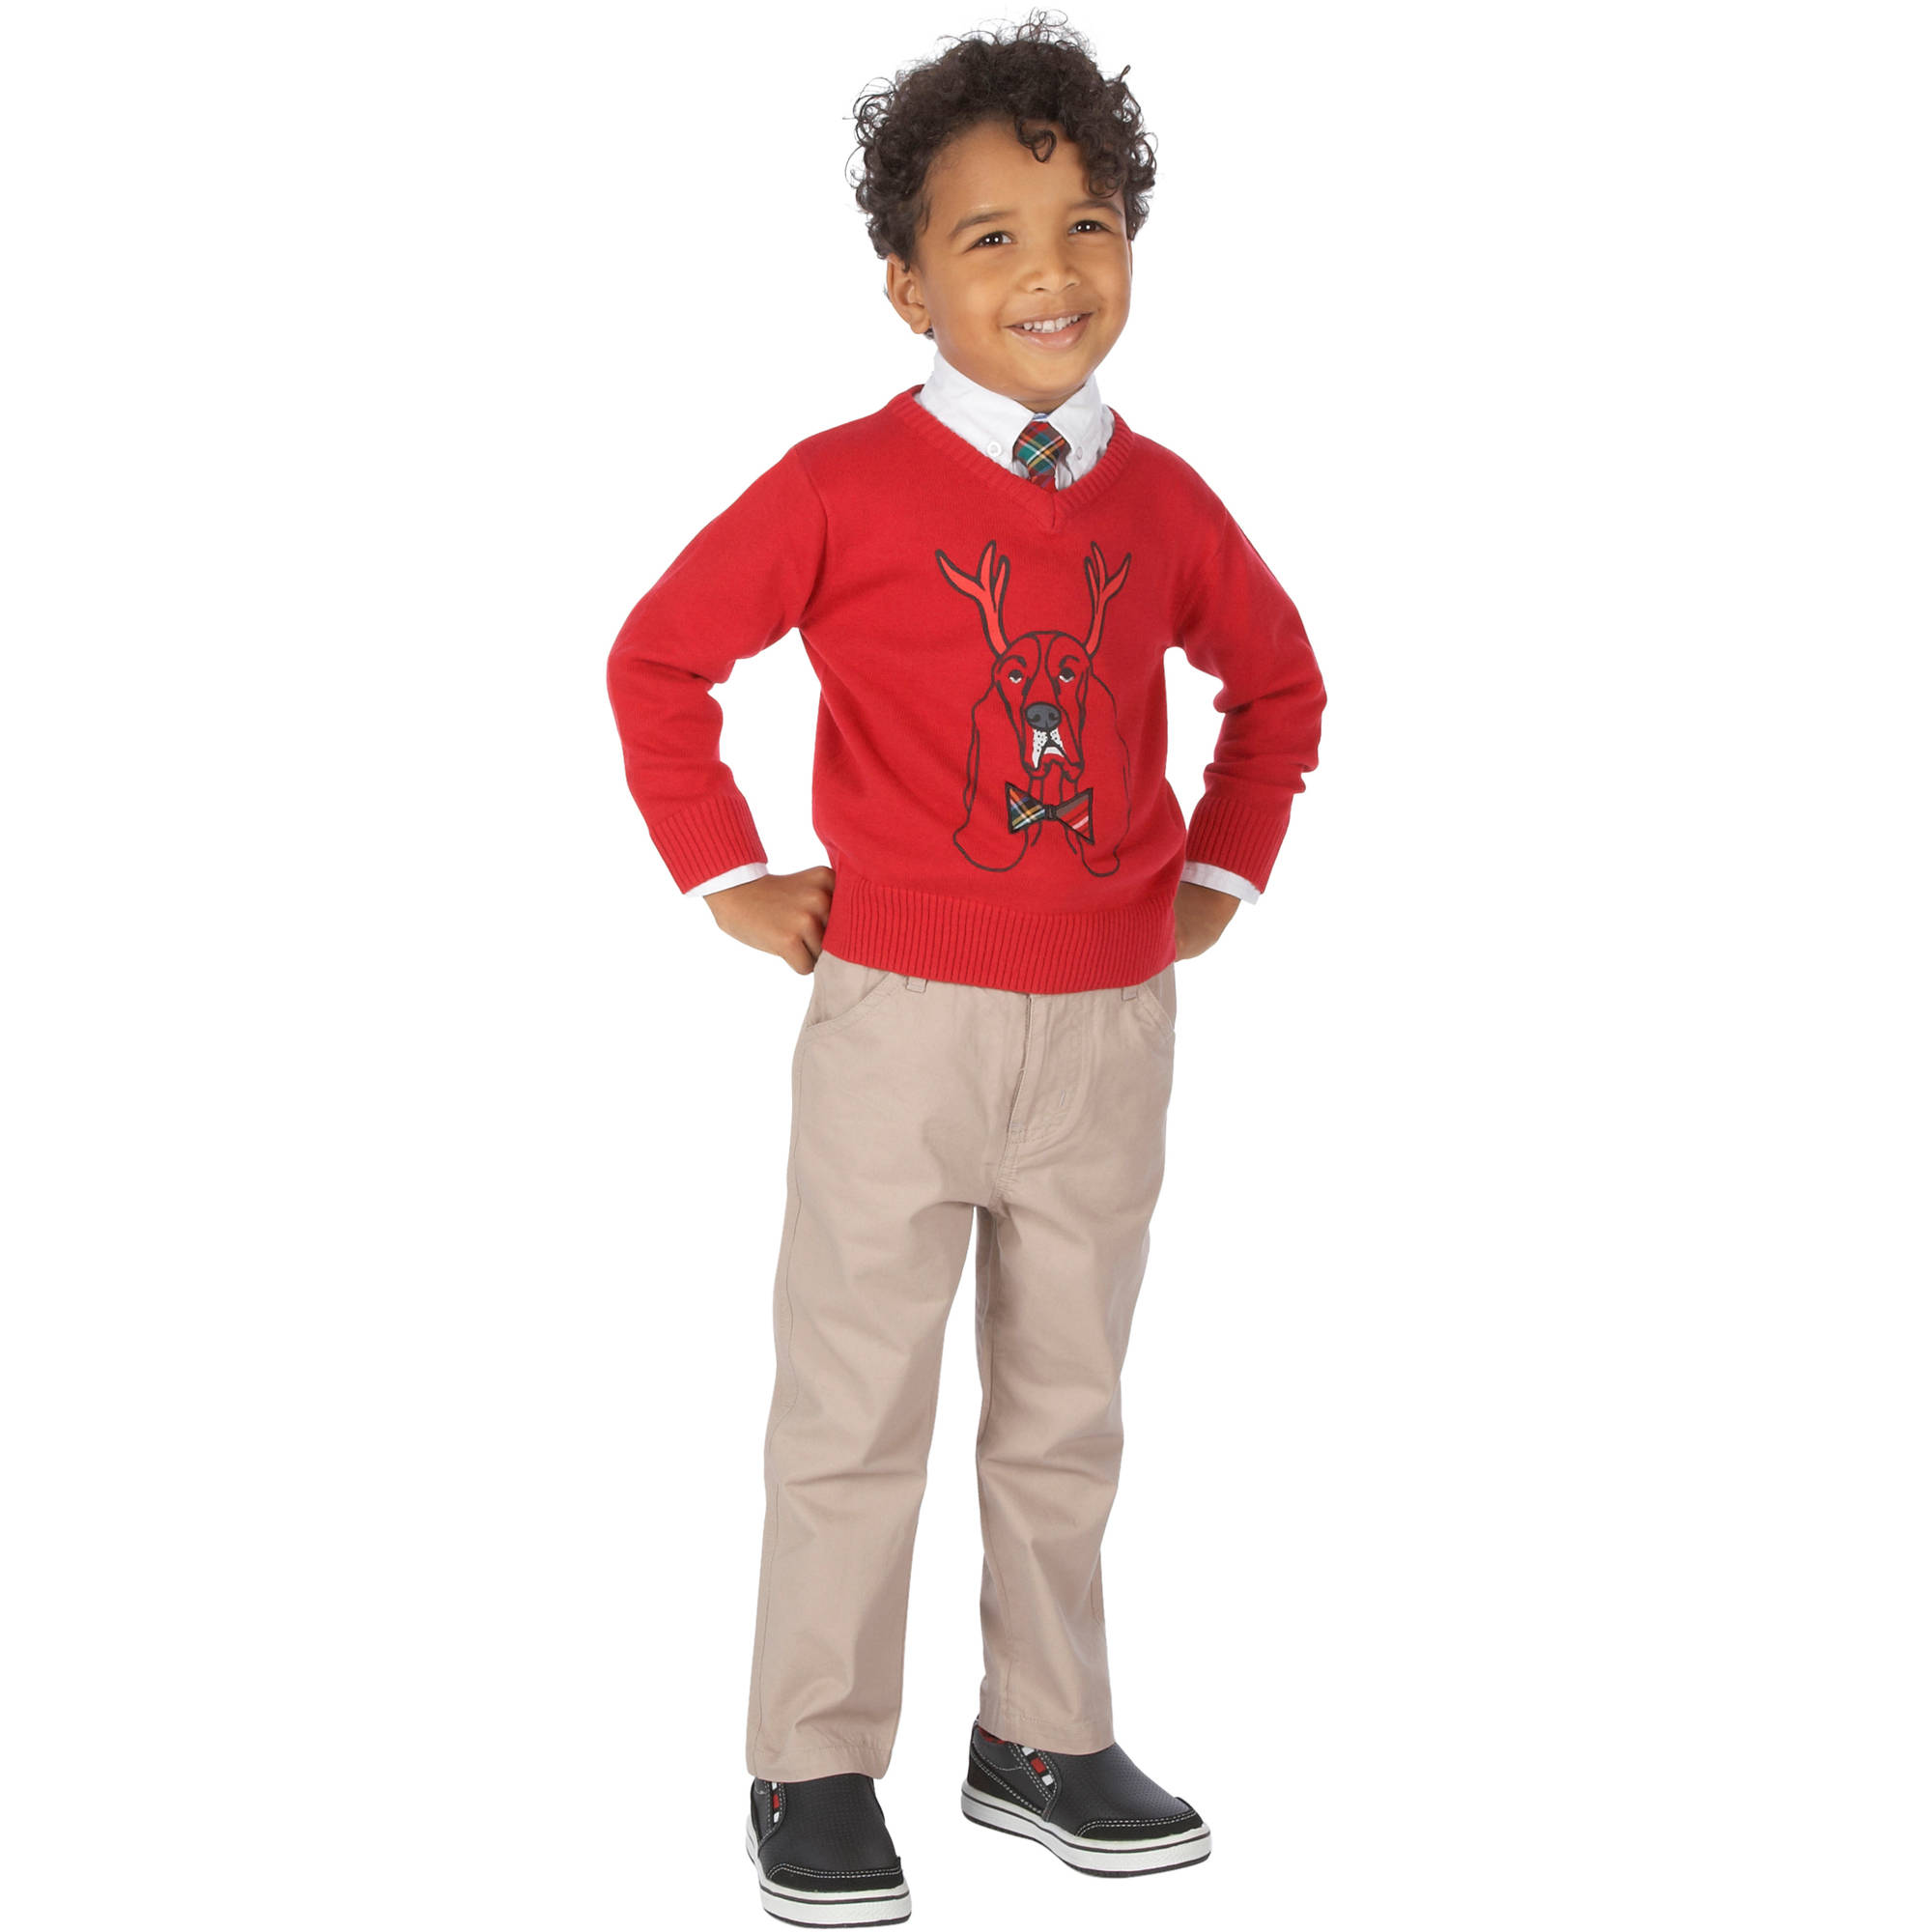 Boys Red Reindeer Dog Sweater - image 1 of 2